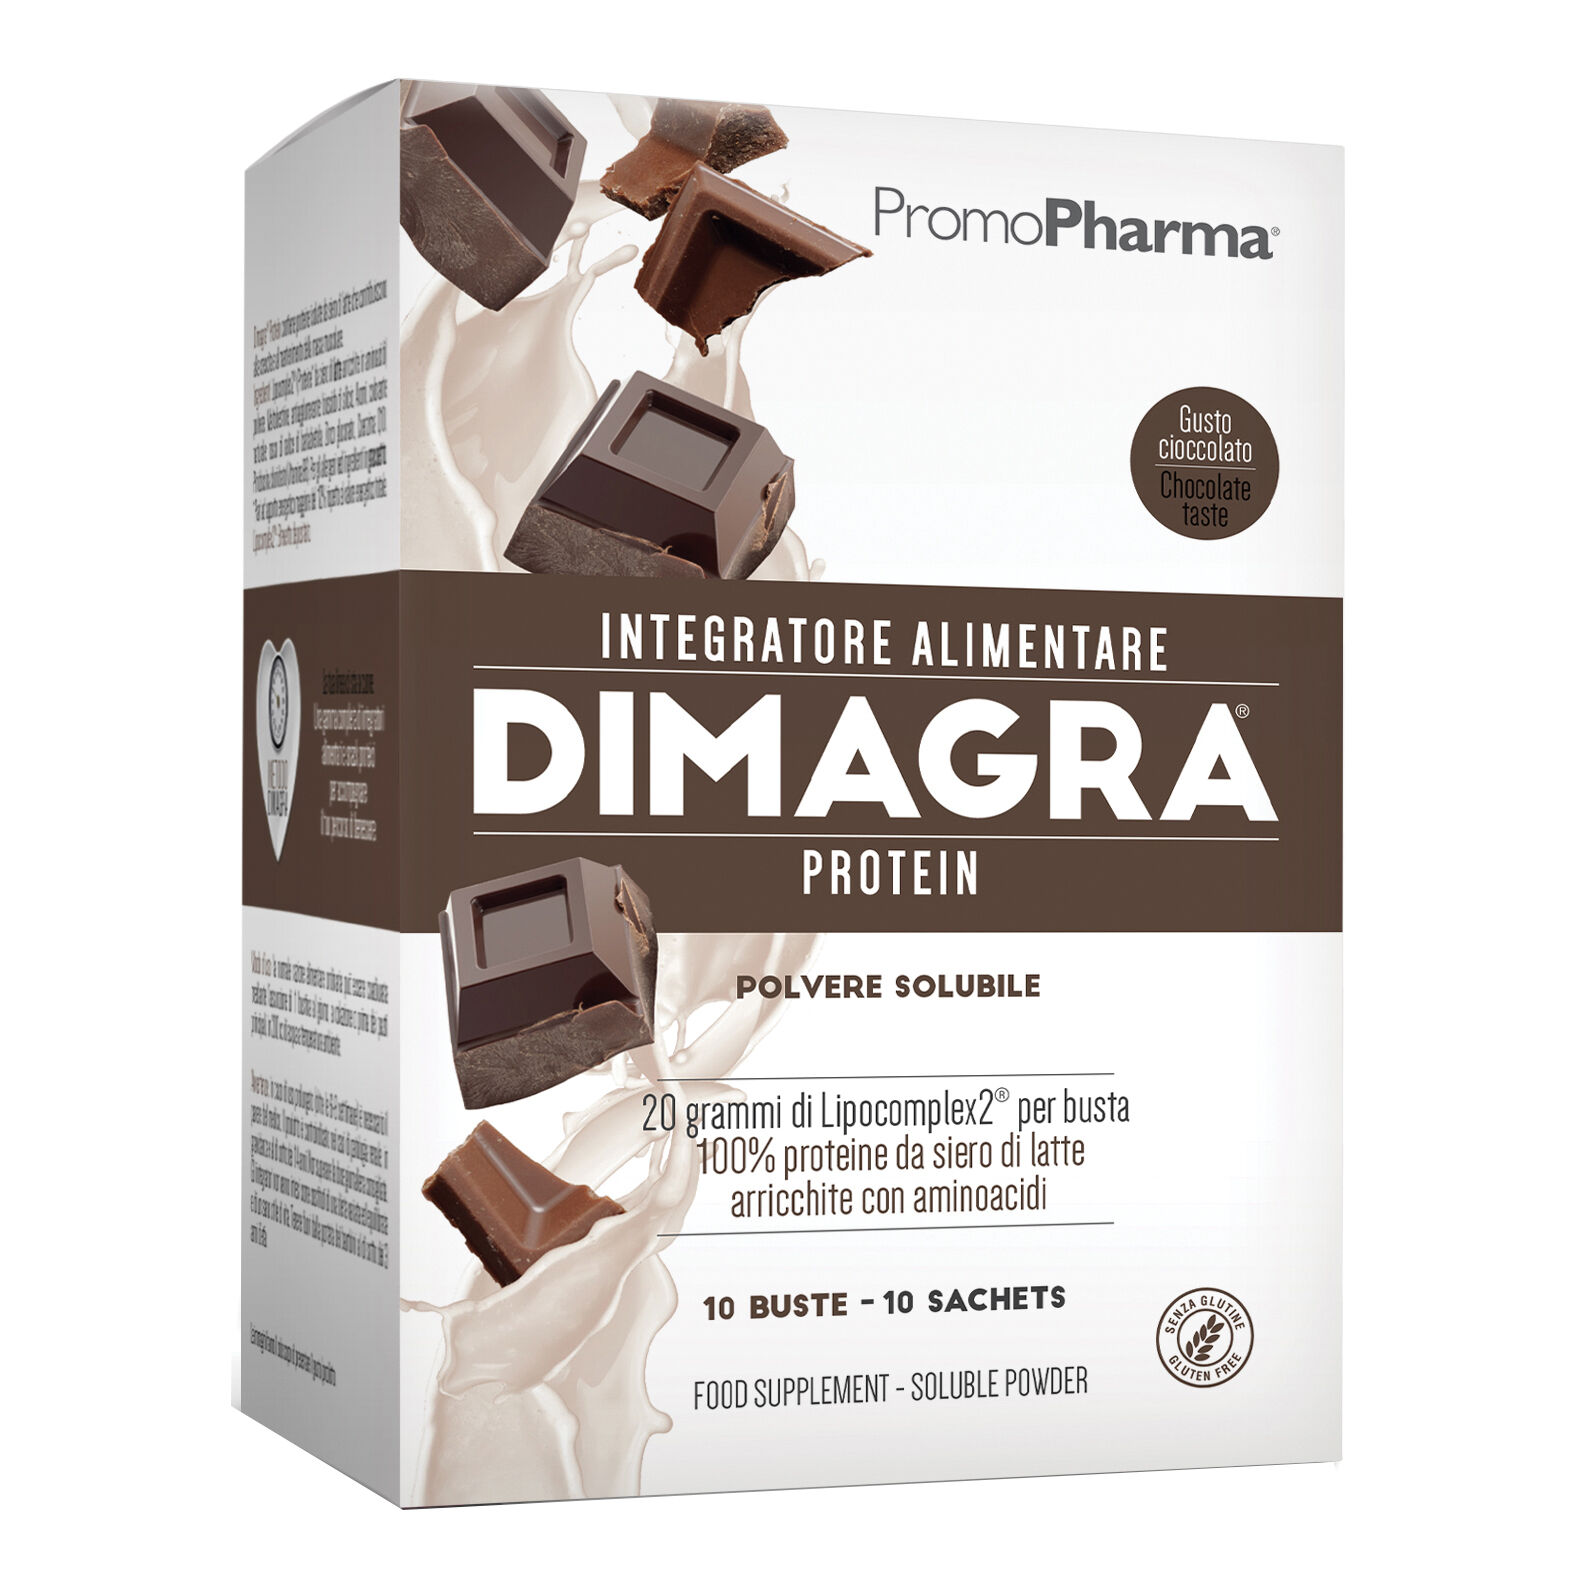 Promopharma Spa Dimagra Protein Cacao 10 Buste